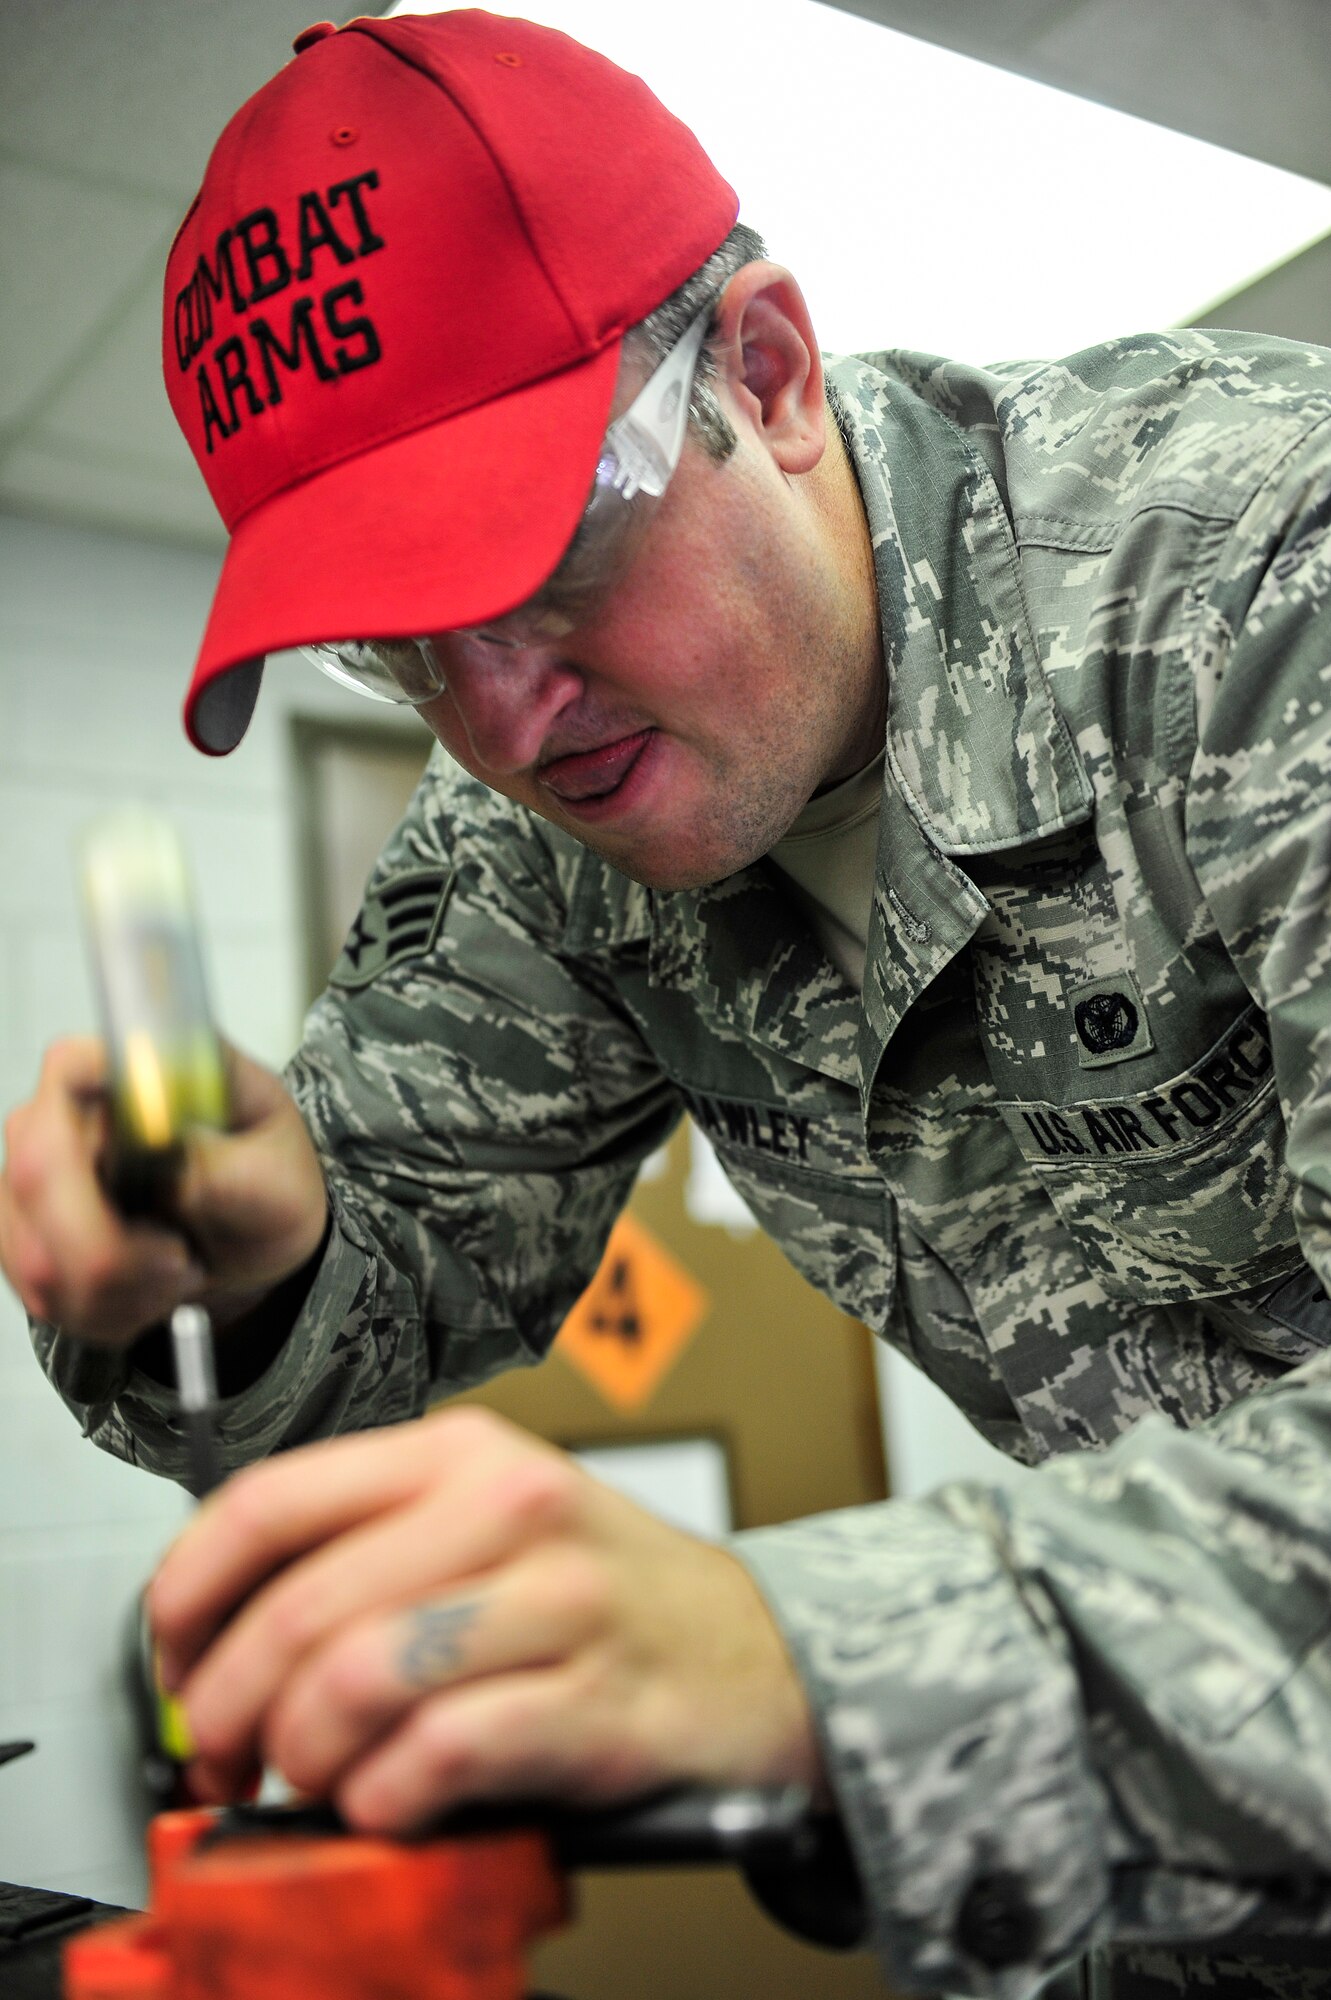 Senior Airman Christopher Crawley, 1st Special Operations Security Forces Squadron Combat Arms Training and Maintenance instructor, removes a pin from an M9 pistol at Hurlburt Field, Fla., December 2, 2014. CATM instructors not only provide firing training, but they also maintain all weapons used by CATM and Security Forces. (U.S. Air Force photo/Airman 1st Class Jeff Parkinson)